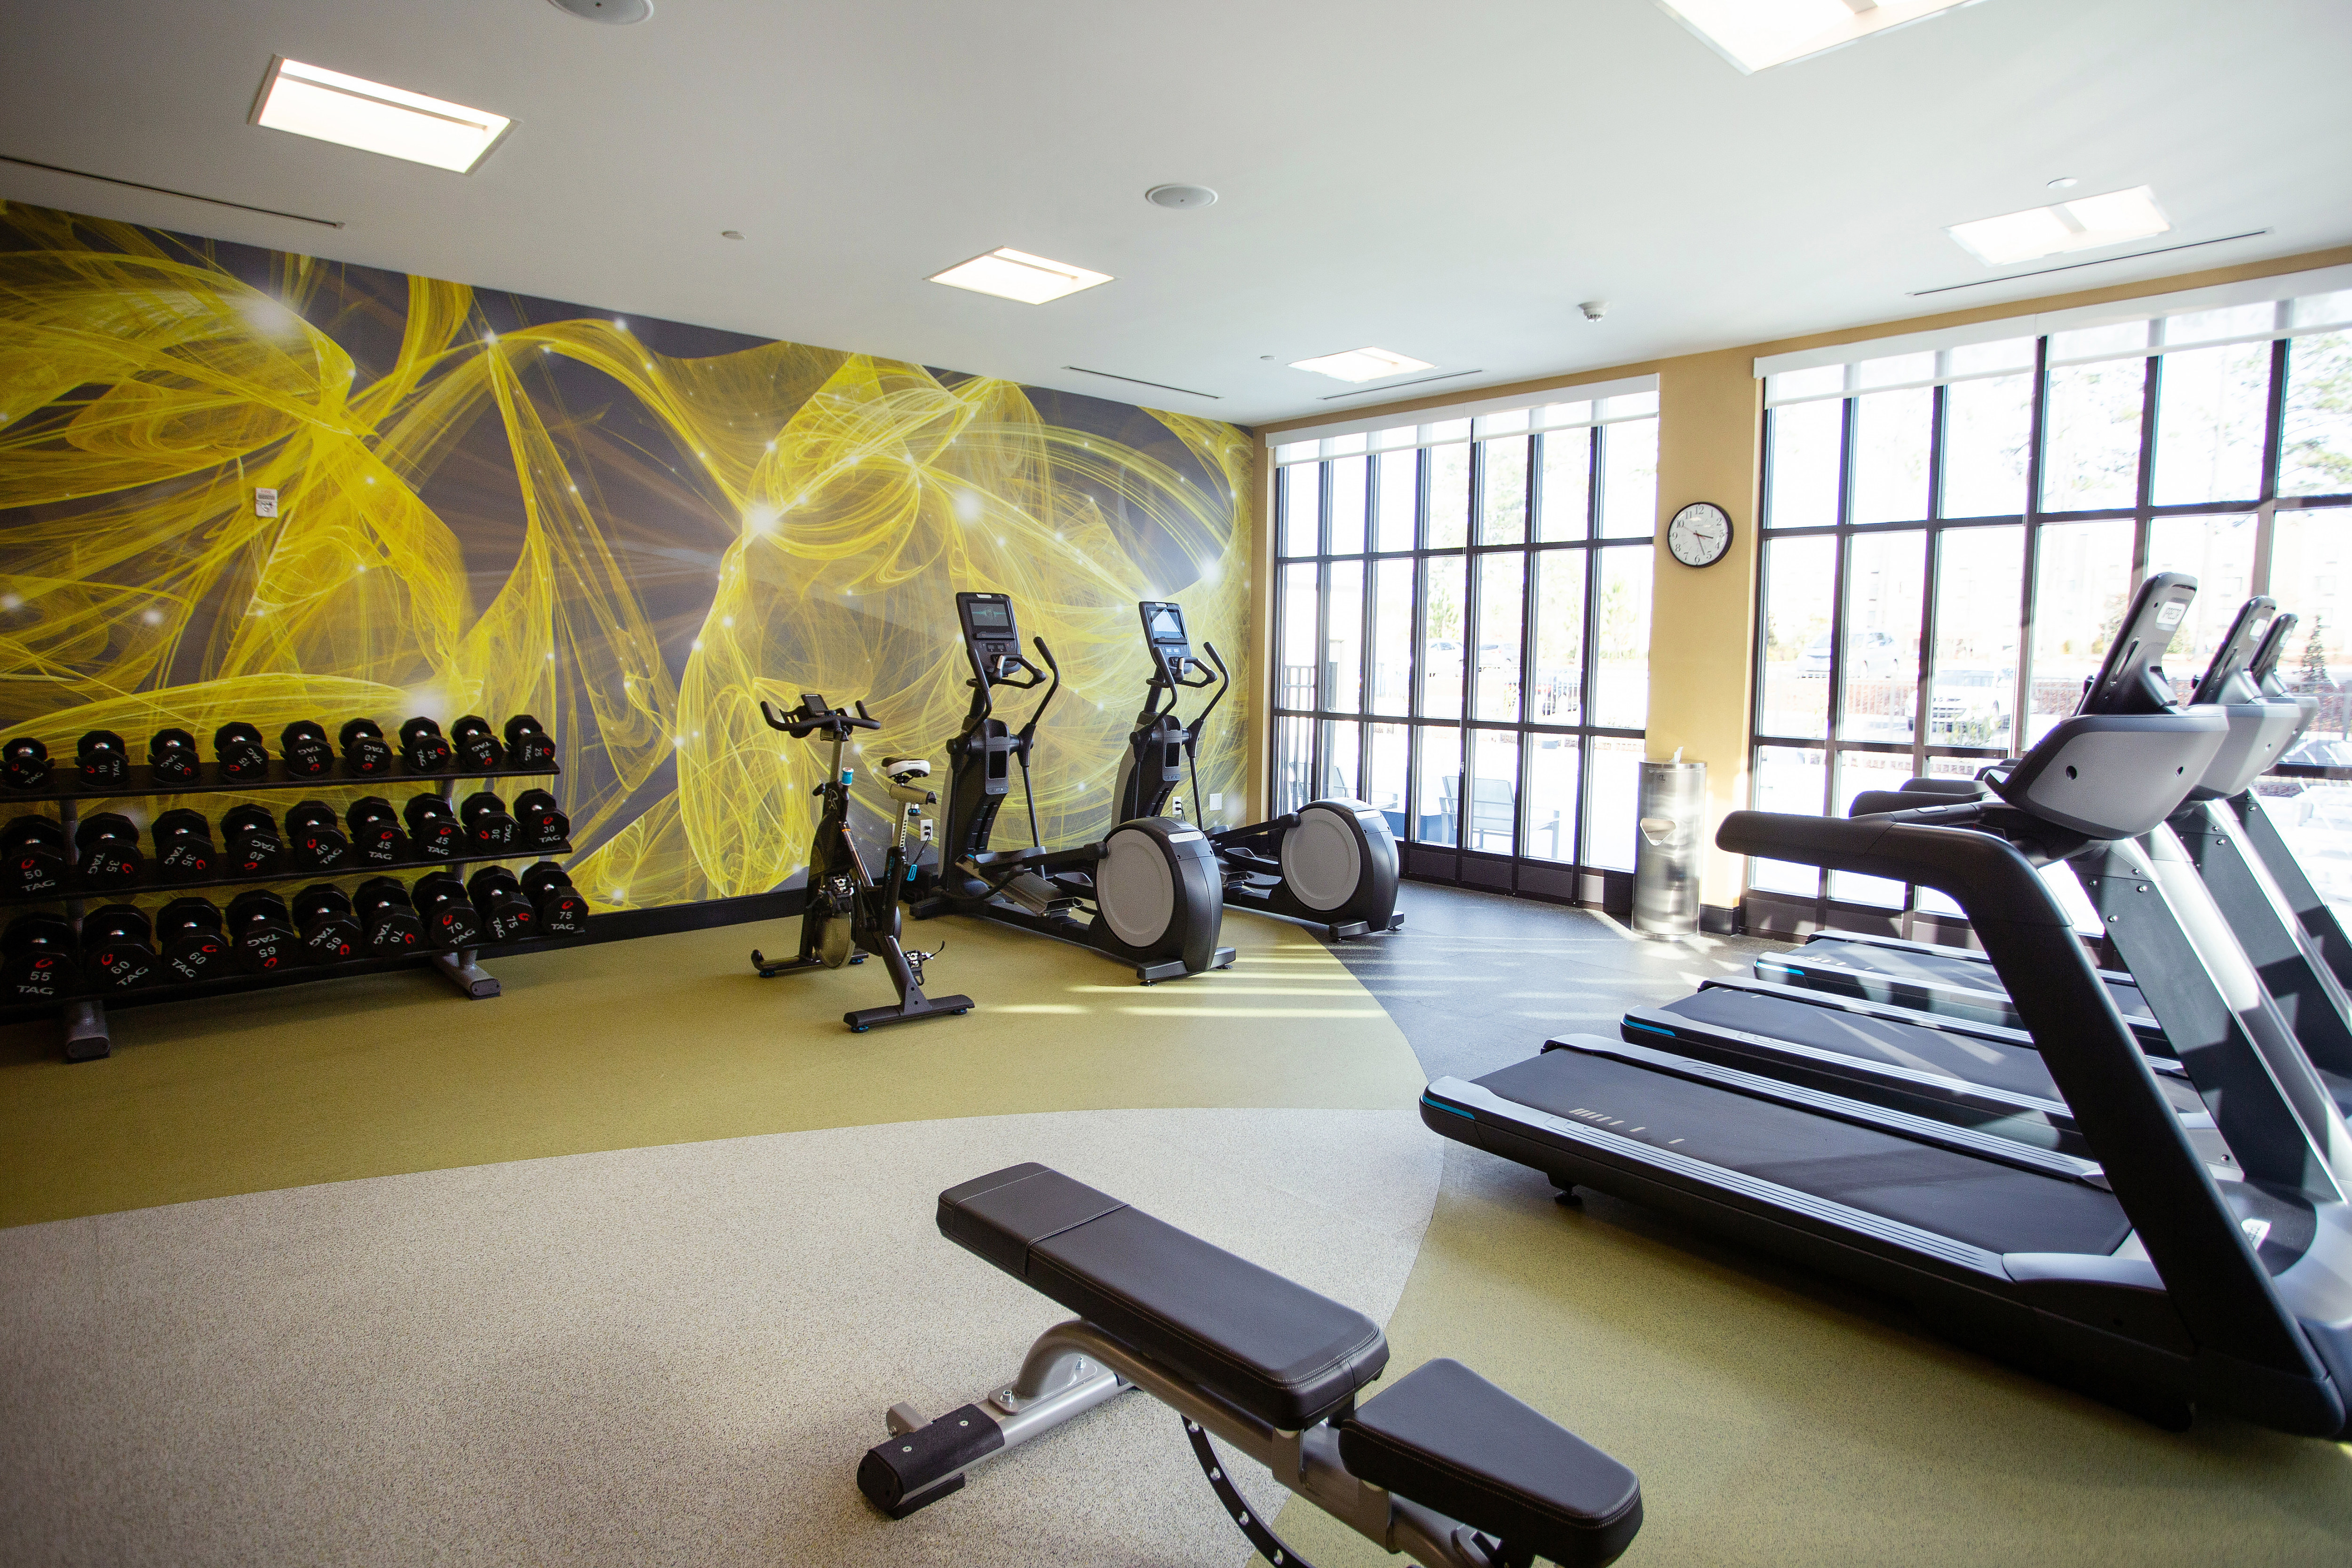 Weights and Treadmills in Fitness Room